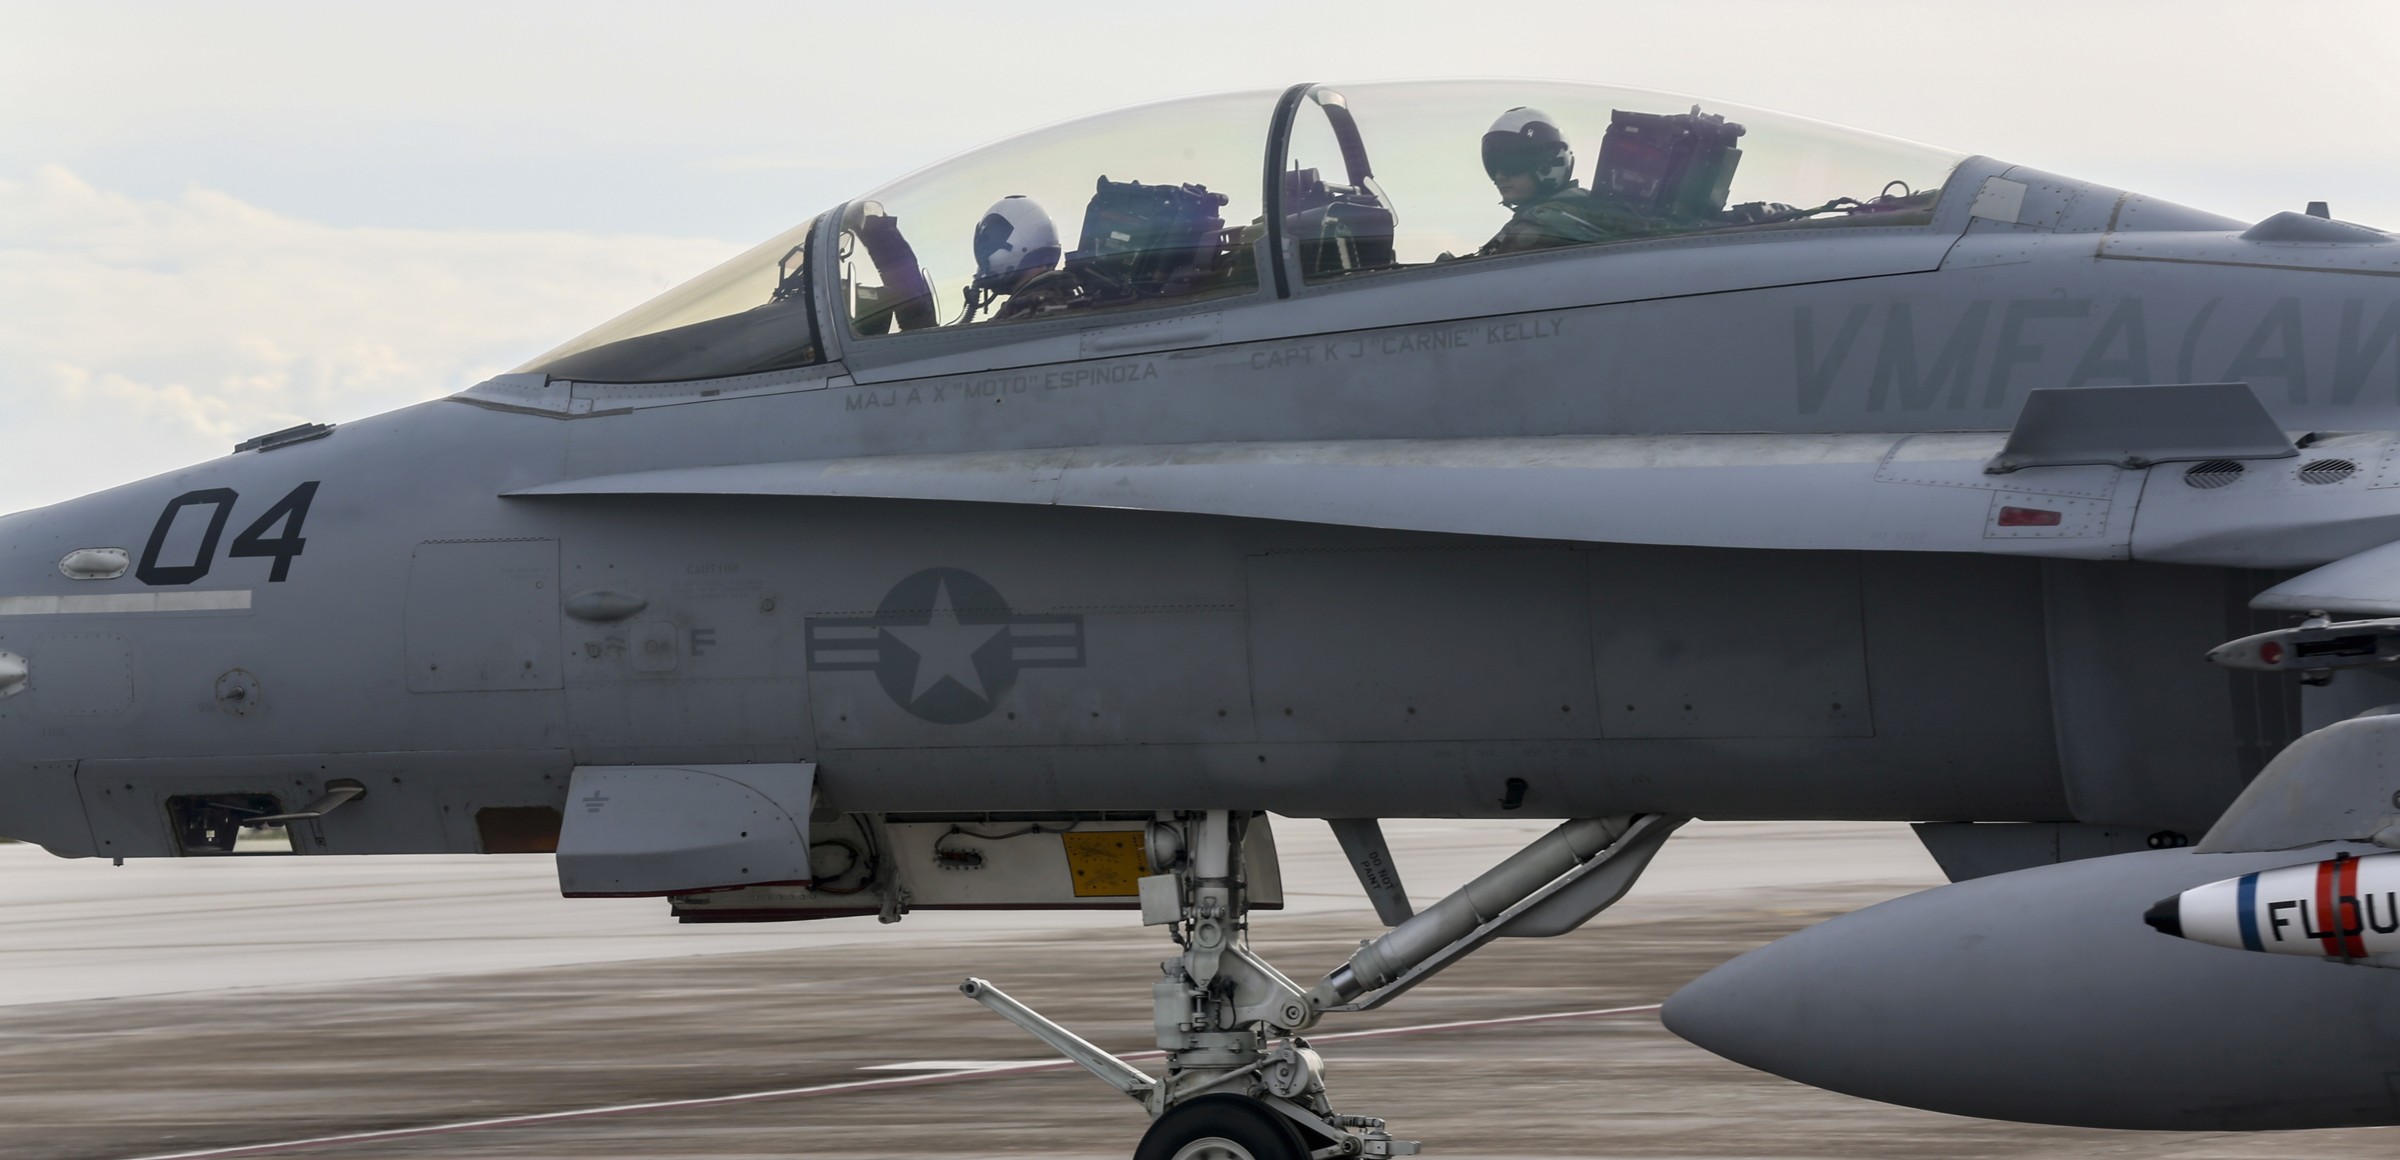 vmfa(aw)-242 bats marine all-weather fighter attack squadron usmc f/a-18d hornet 67